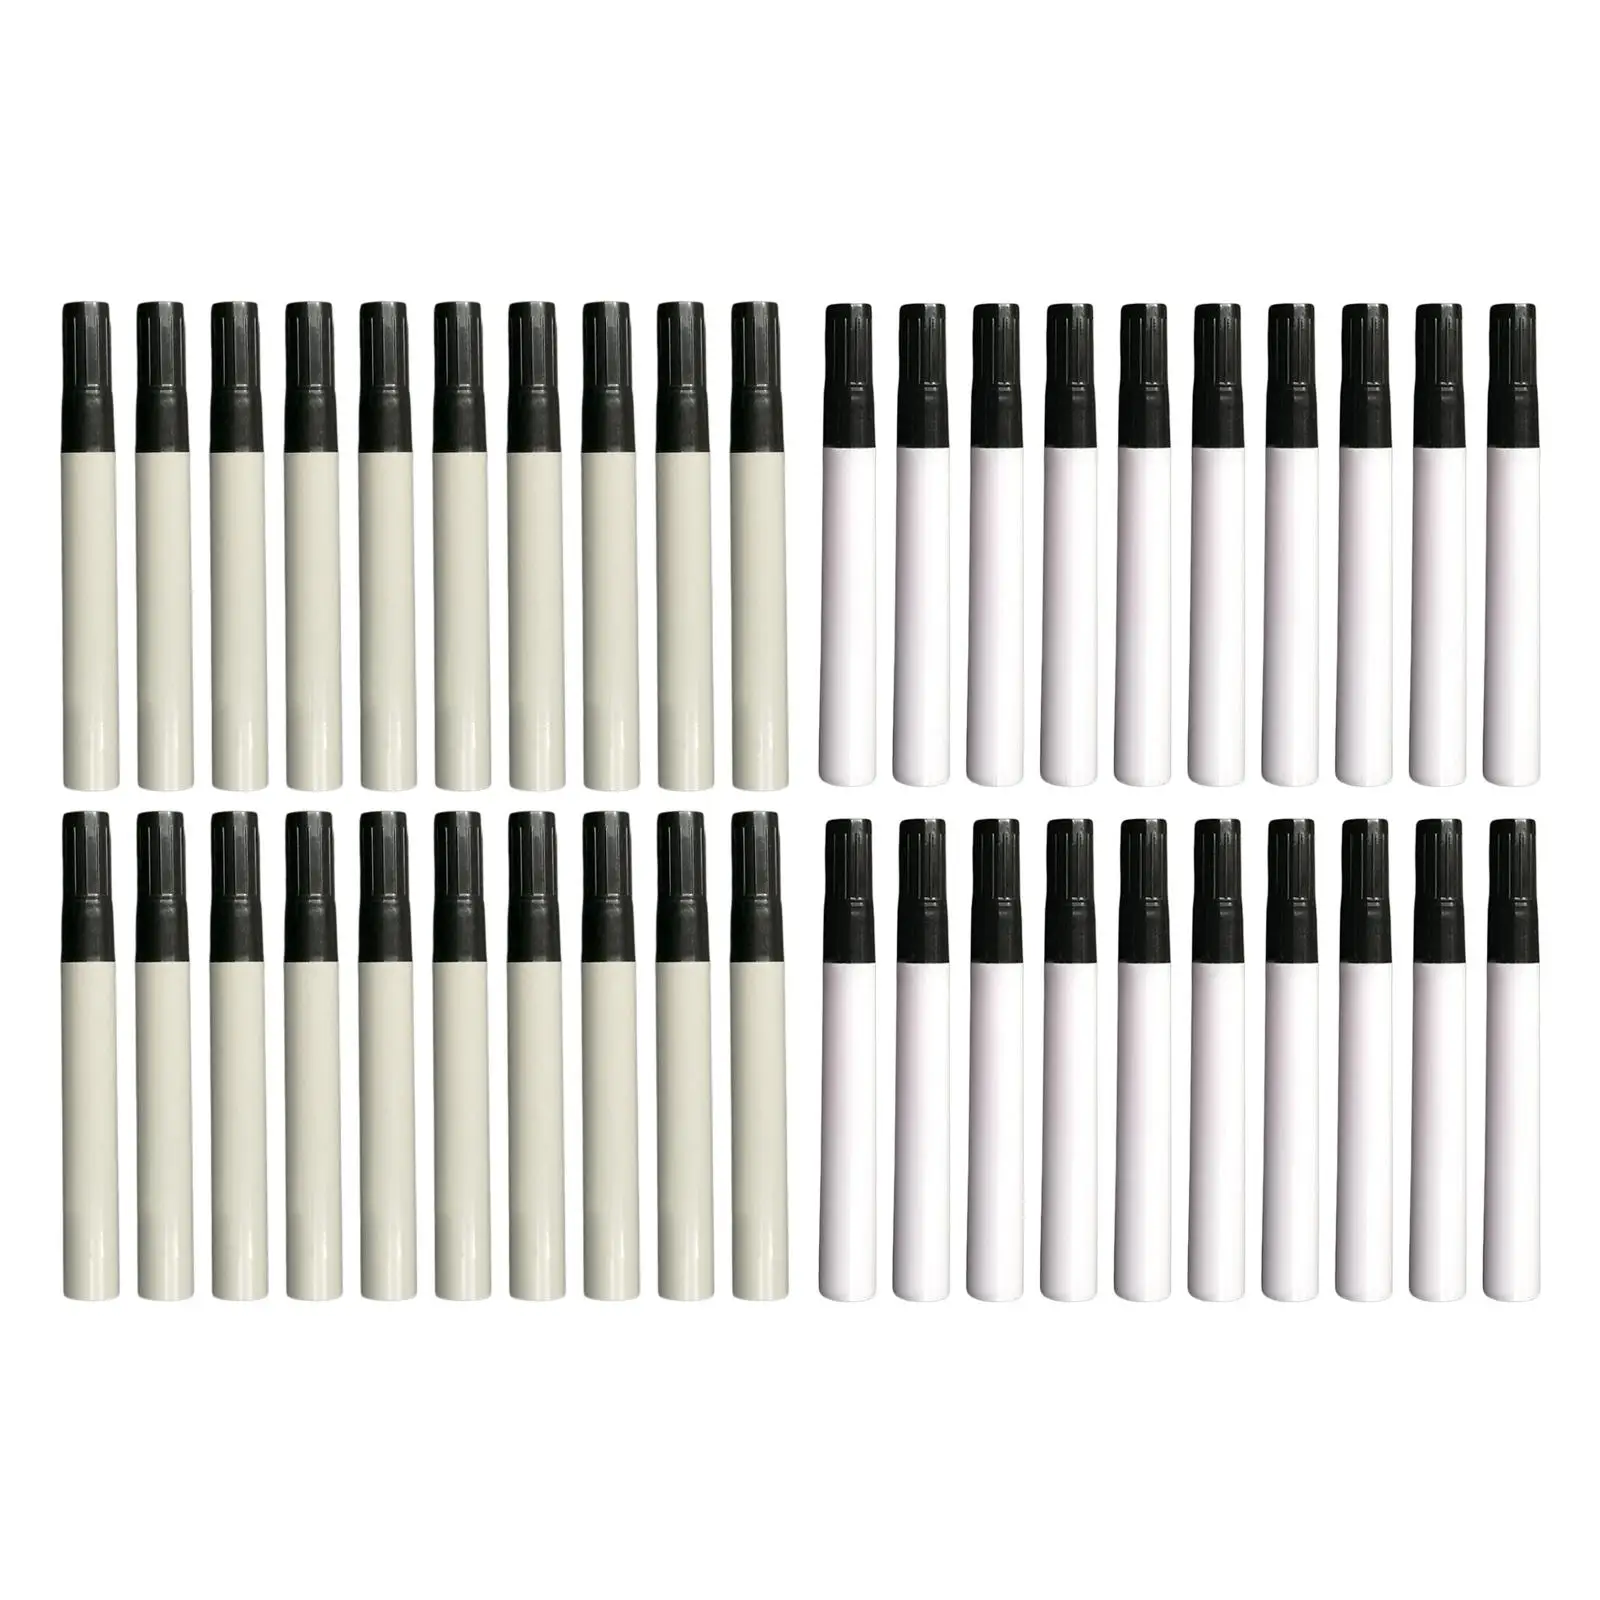 10x Empty Fillable Blank Paint  Pen Markers Fill with Your Own Art ,Pen Rod Barrels Tube Auto Painting  for Art, Painting